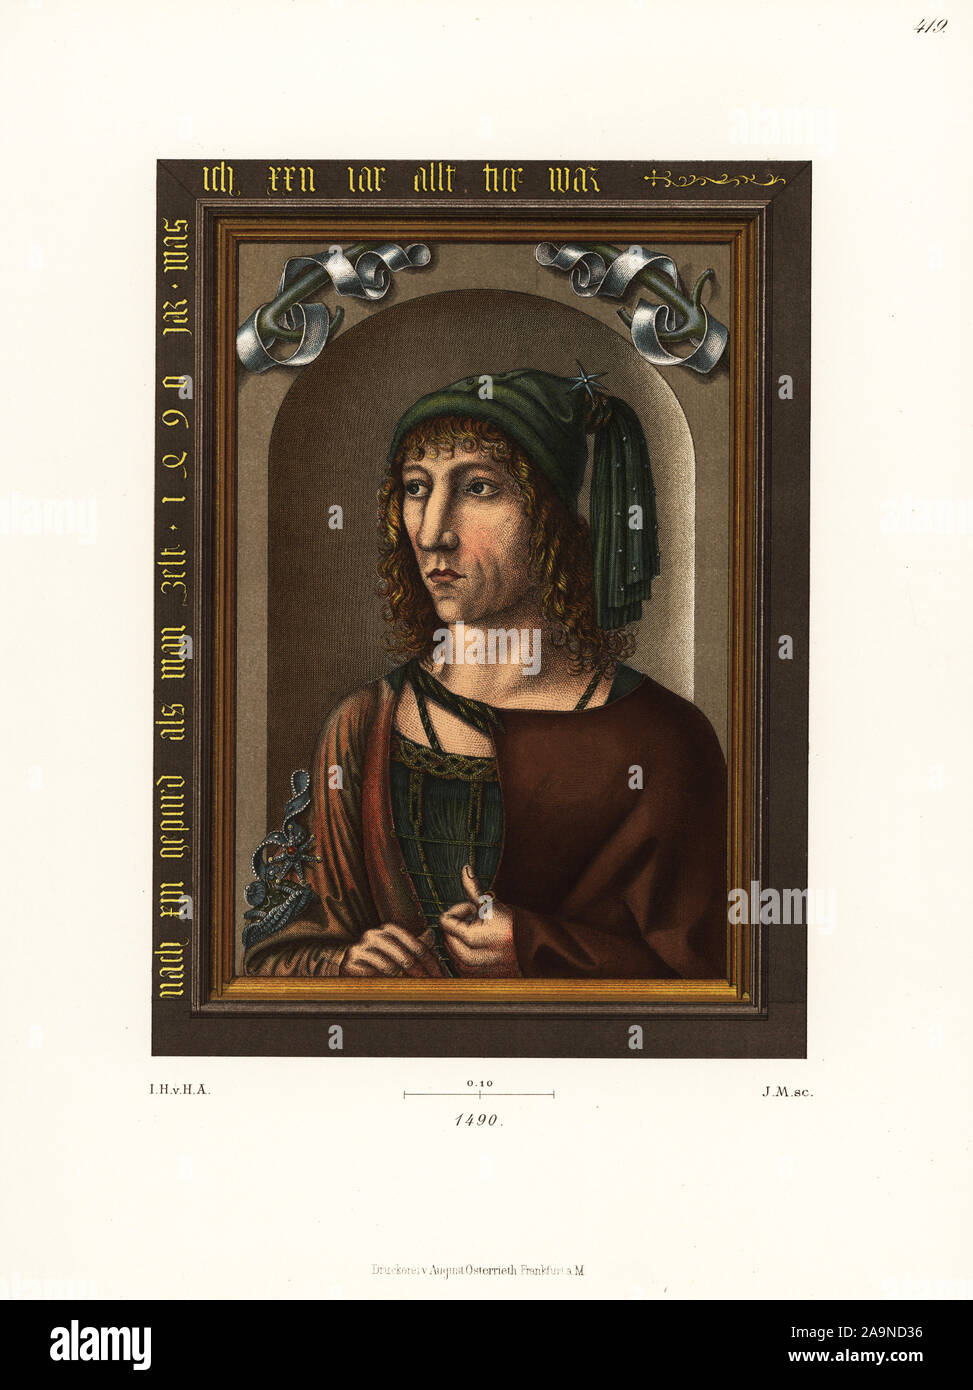 Portrait of a 22-year-old German nobleman in oils from 1490. Painted by the famous master of the Swabian school Bartholomaus Zeitblom. Chromolithograph from Hefner-Alteneck's Costumes, Artworks and Appliances from the Middle Ages to the 17th Century, Frankfurt, 1889. Illustration by Dr. Jakob Heinrich von Hefner-Alteneck, lithographed by J.M. Dr. Hefner-Alteneck (1811 - 1903) was a German museum curator, archaeologist, art historian, illustrator and etcher. Stock Photo